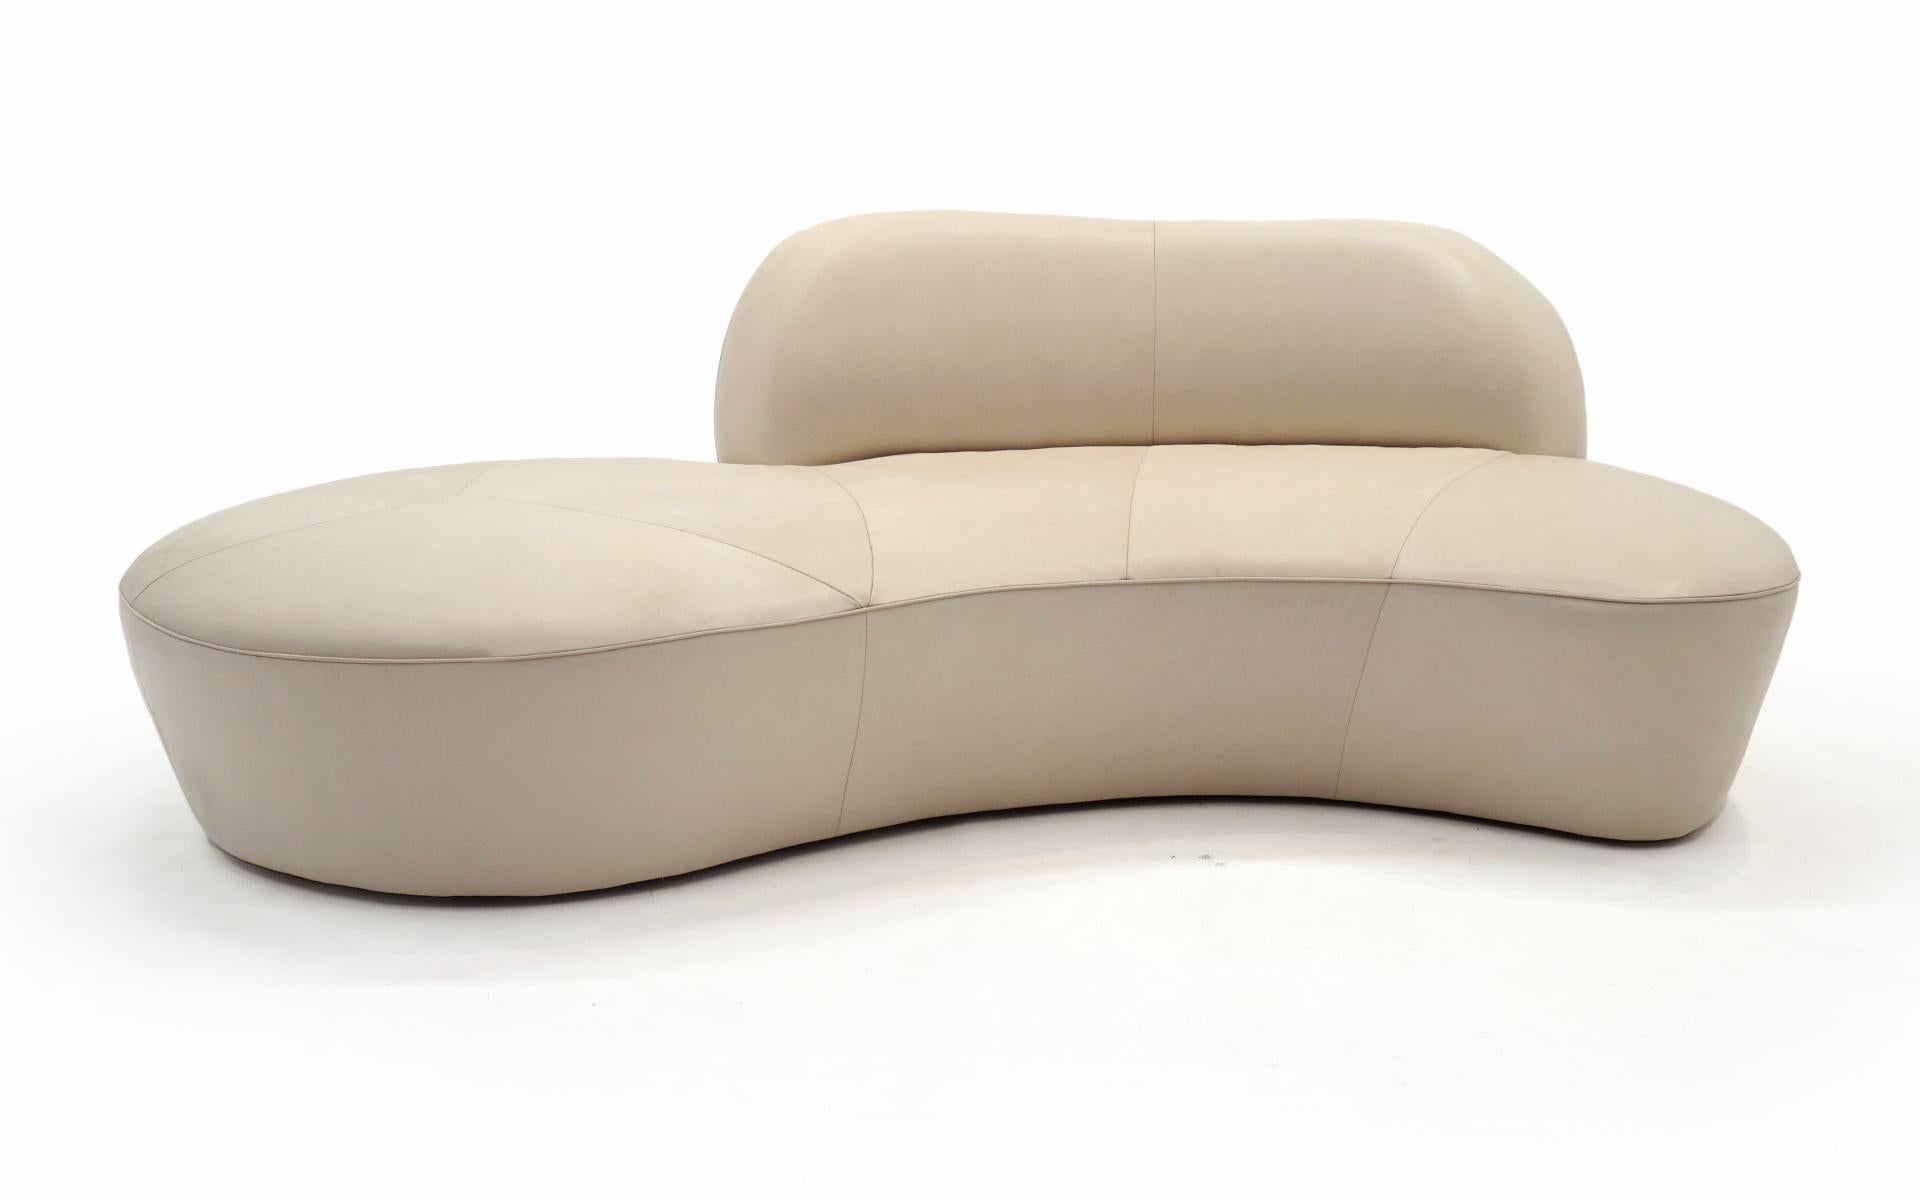 Pair White / Ivory Curved Leather Zoe Cloud Sofas by Vladimir Kagan, Signed For Sale 3